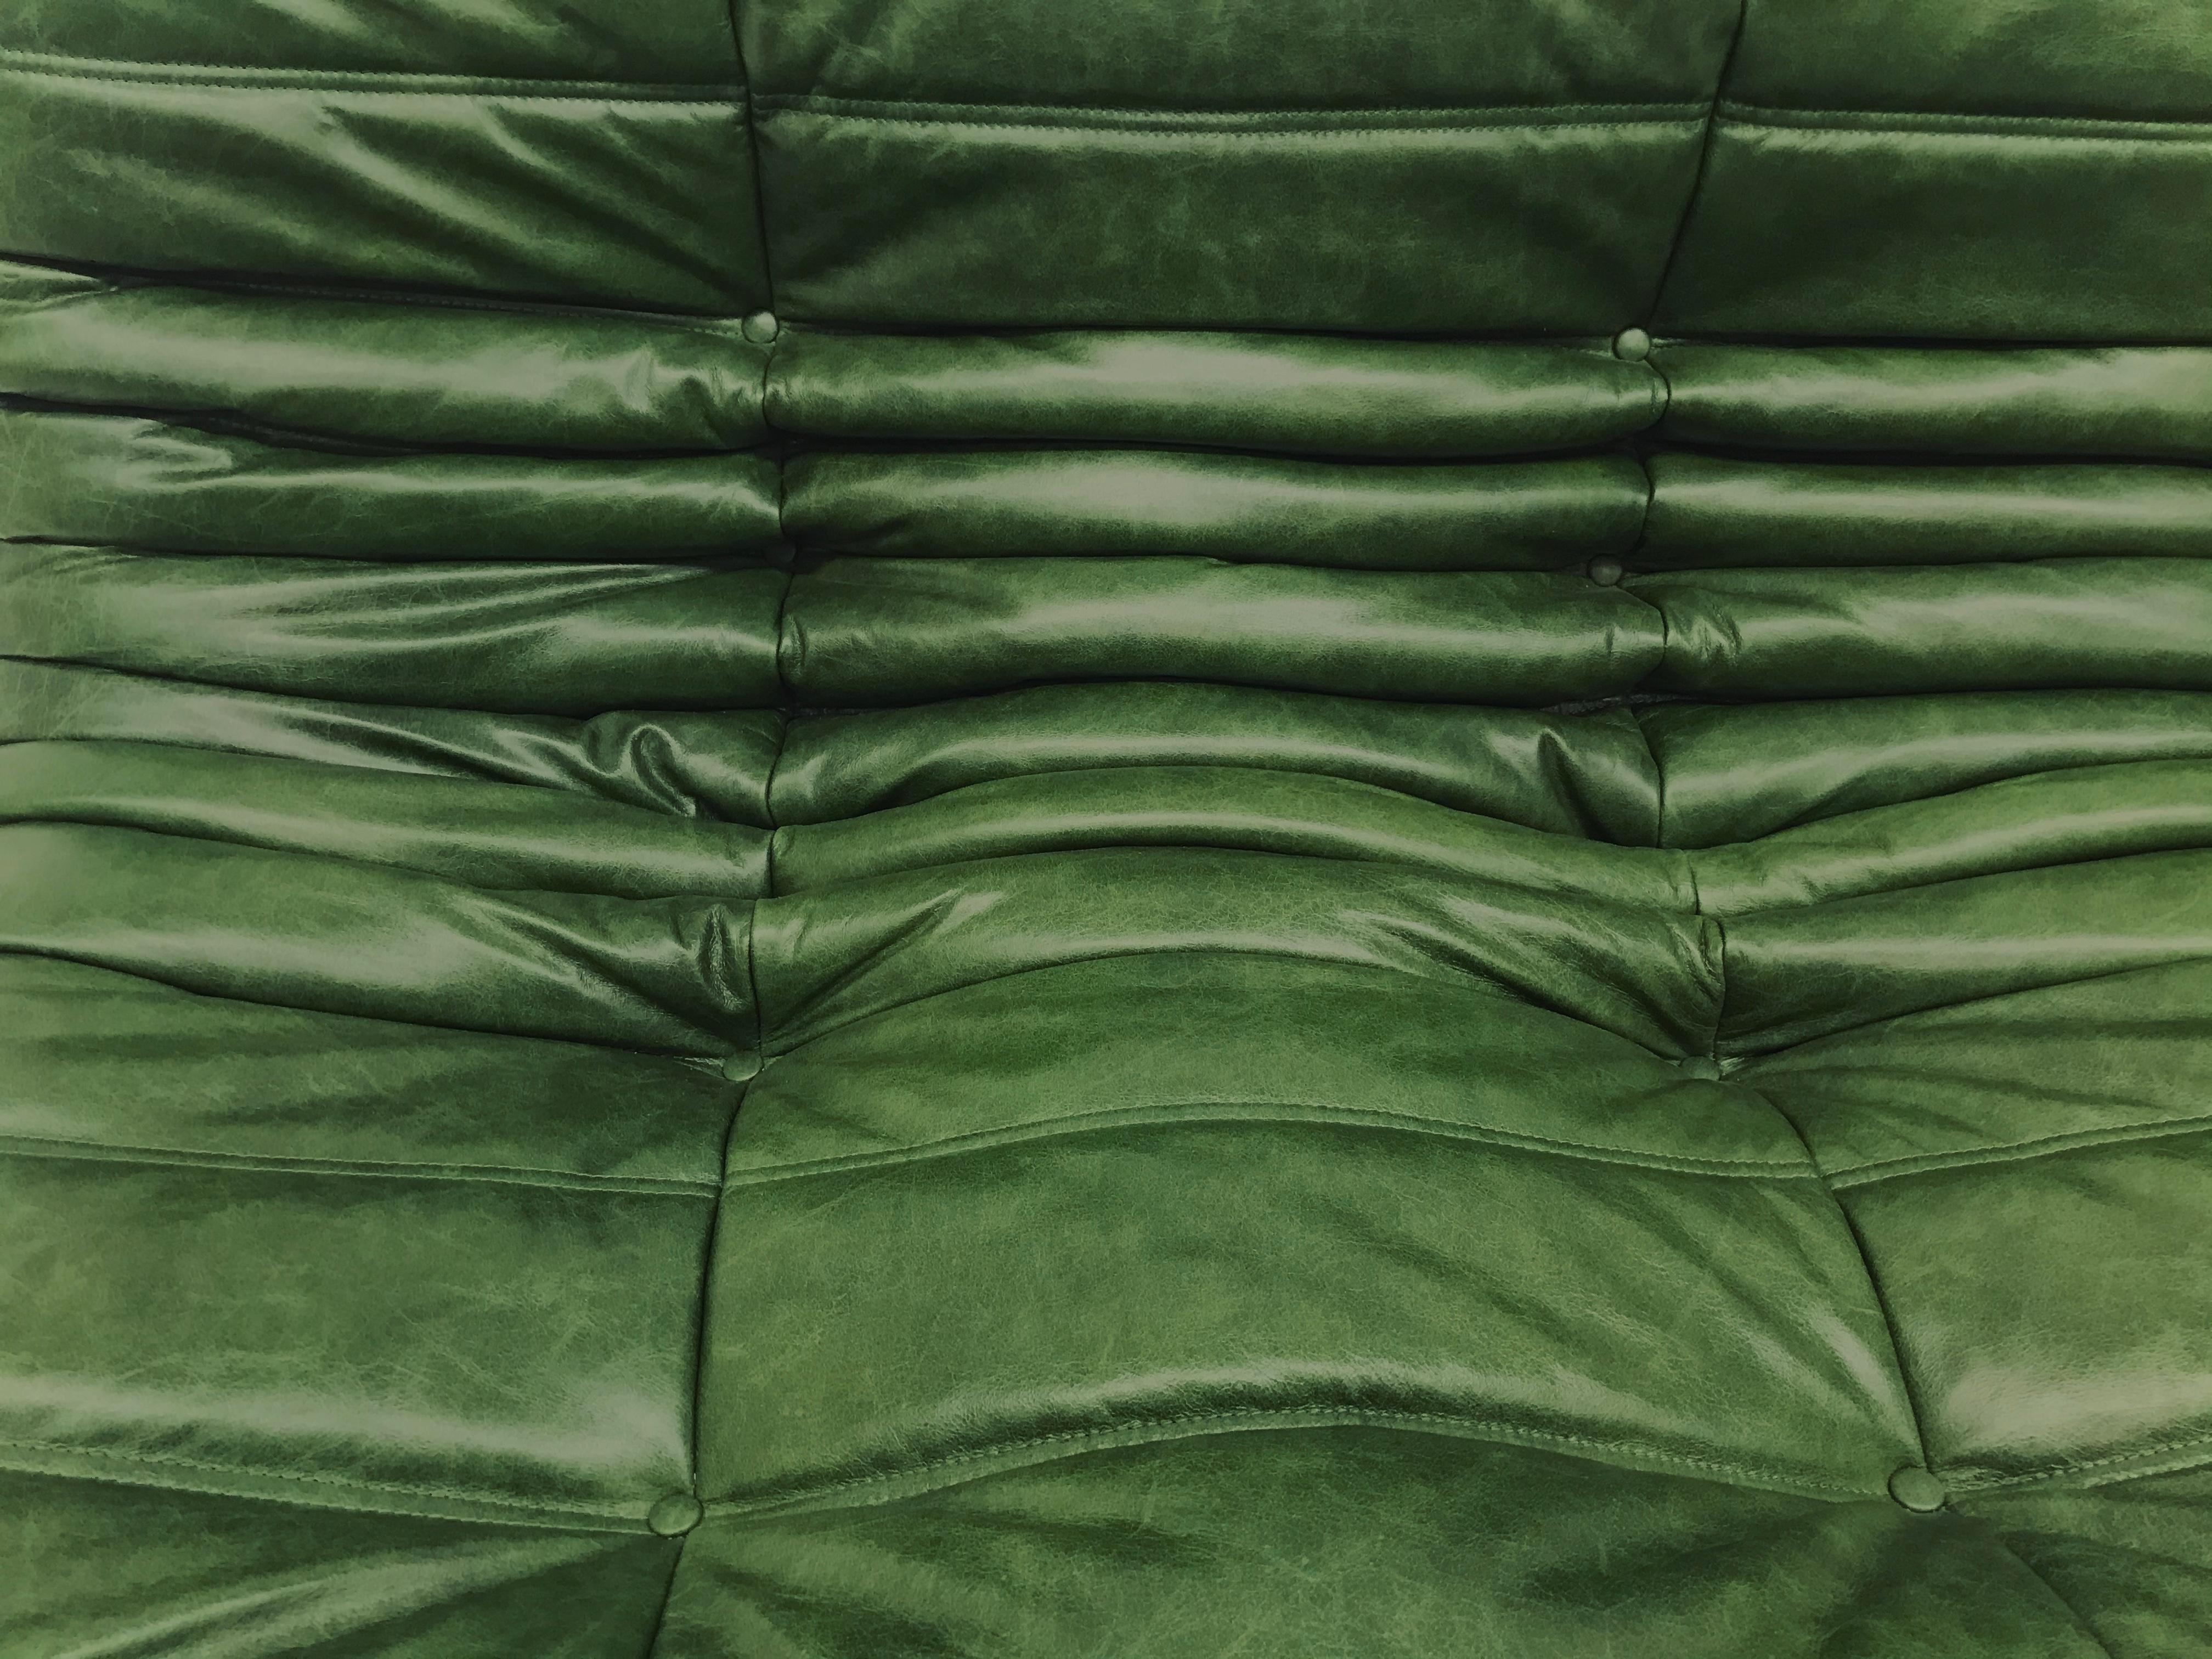 The most sold designer sofa in the world. The Togo sofa designed by Michel Ducaroy in 1973 for Ligne Roset but still very popular today. This sofa is refurbished. Weak parts of foam have been replaced by new firm foam. Thereafter the sofa is newly